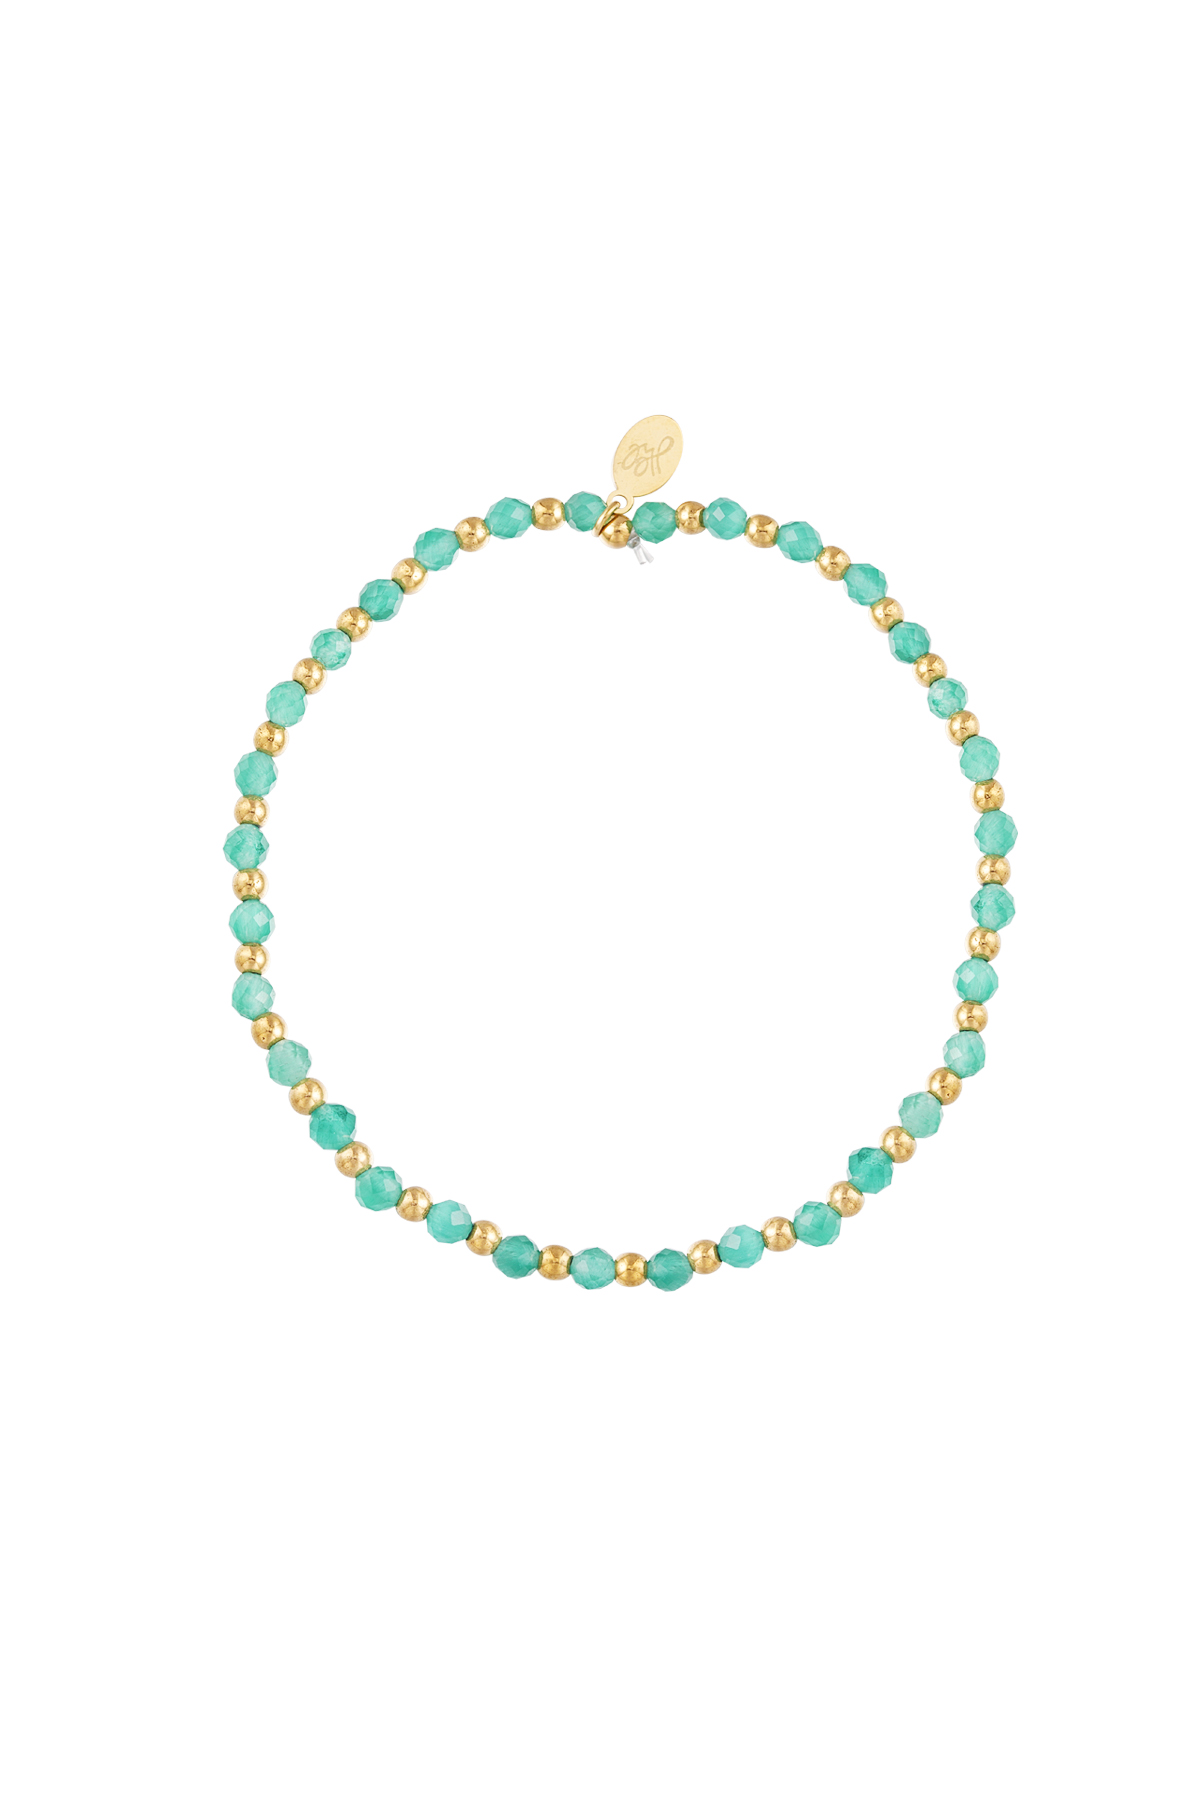 Green & Gold / Beaded bracelet - turquoise/gold Picture5